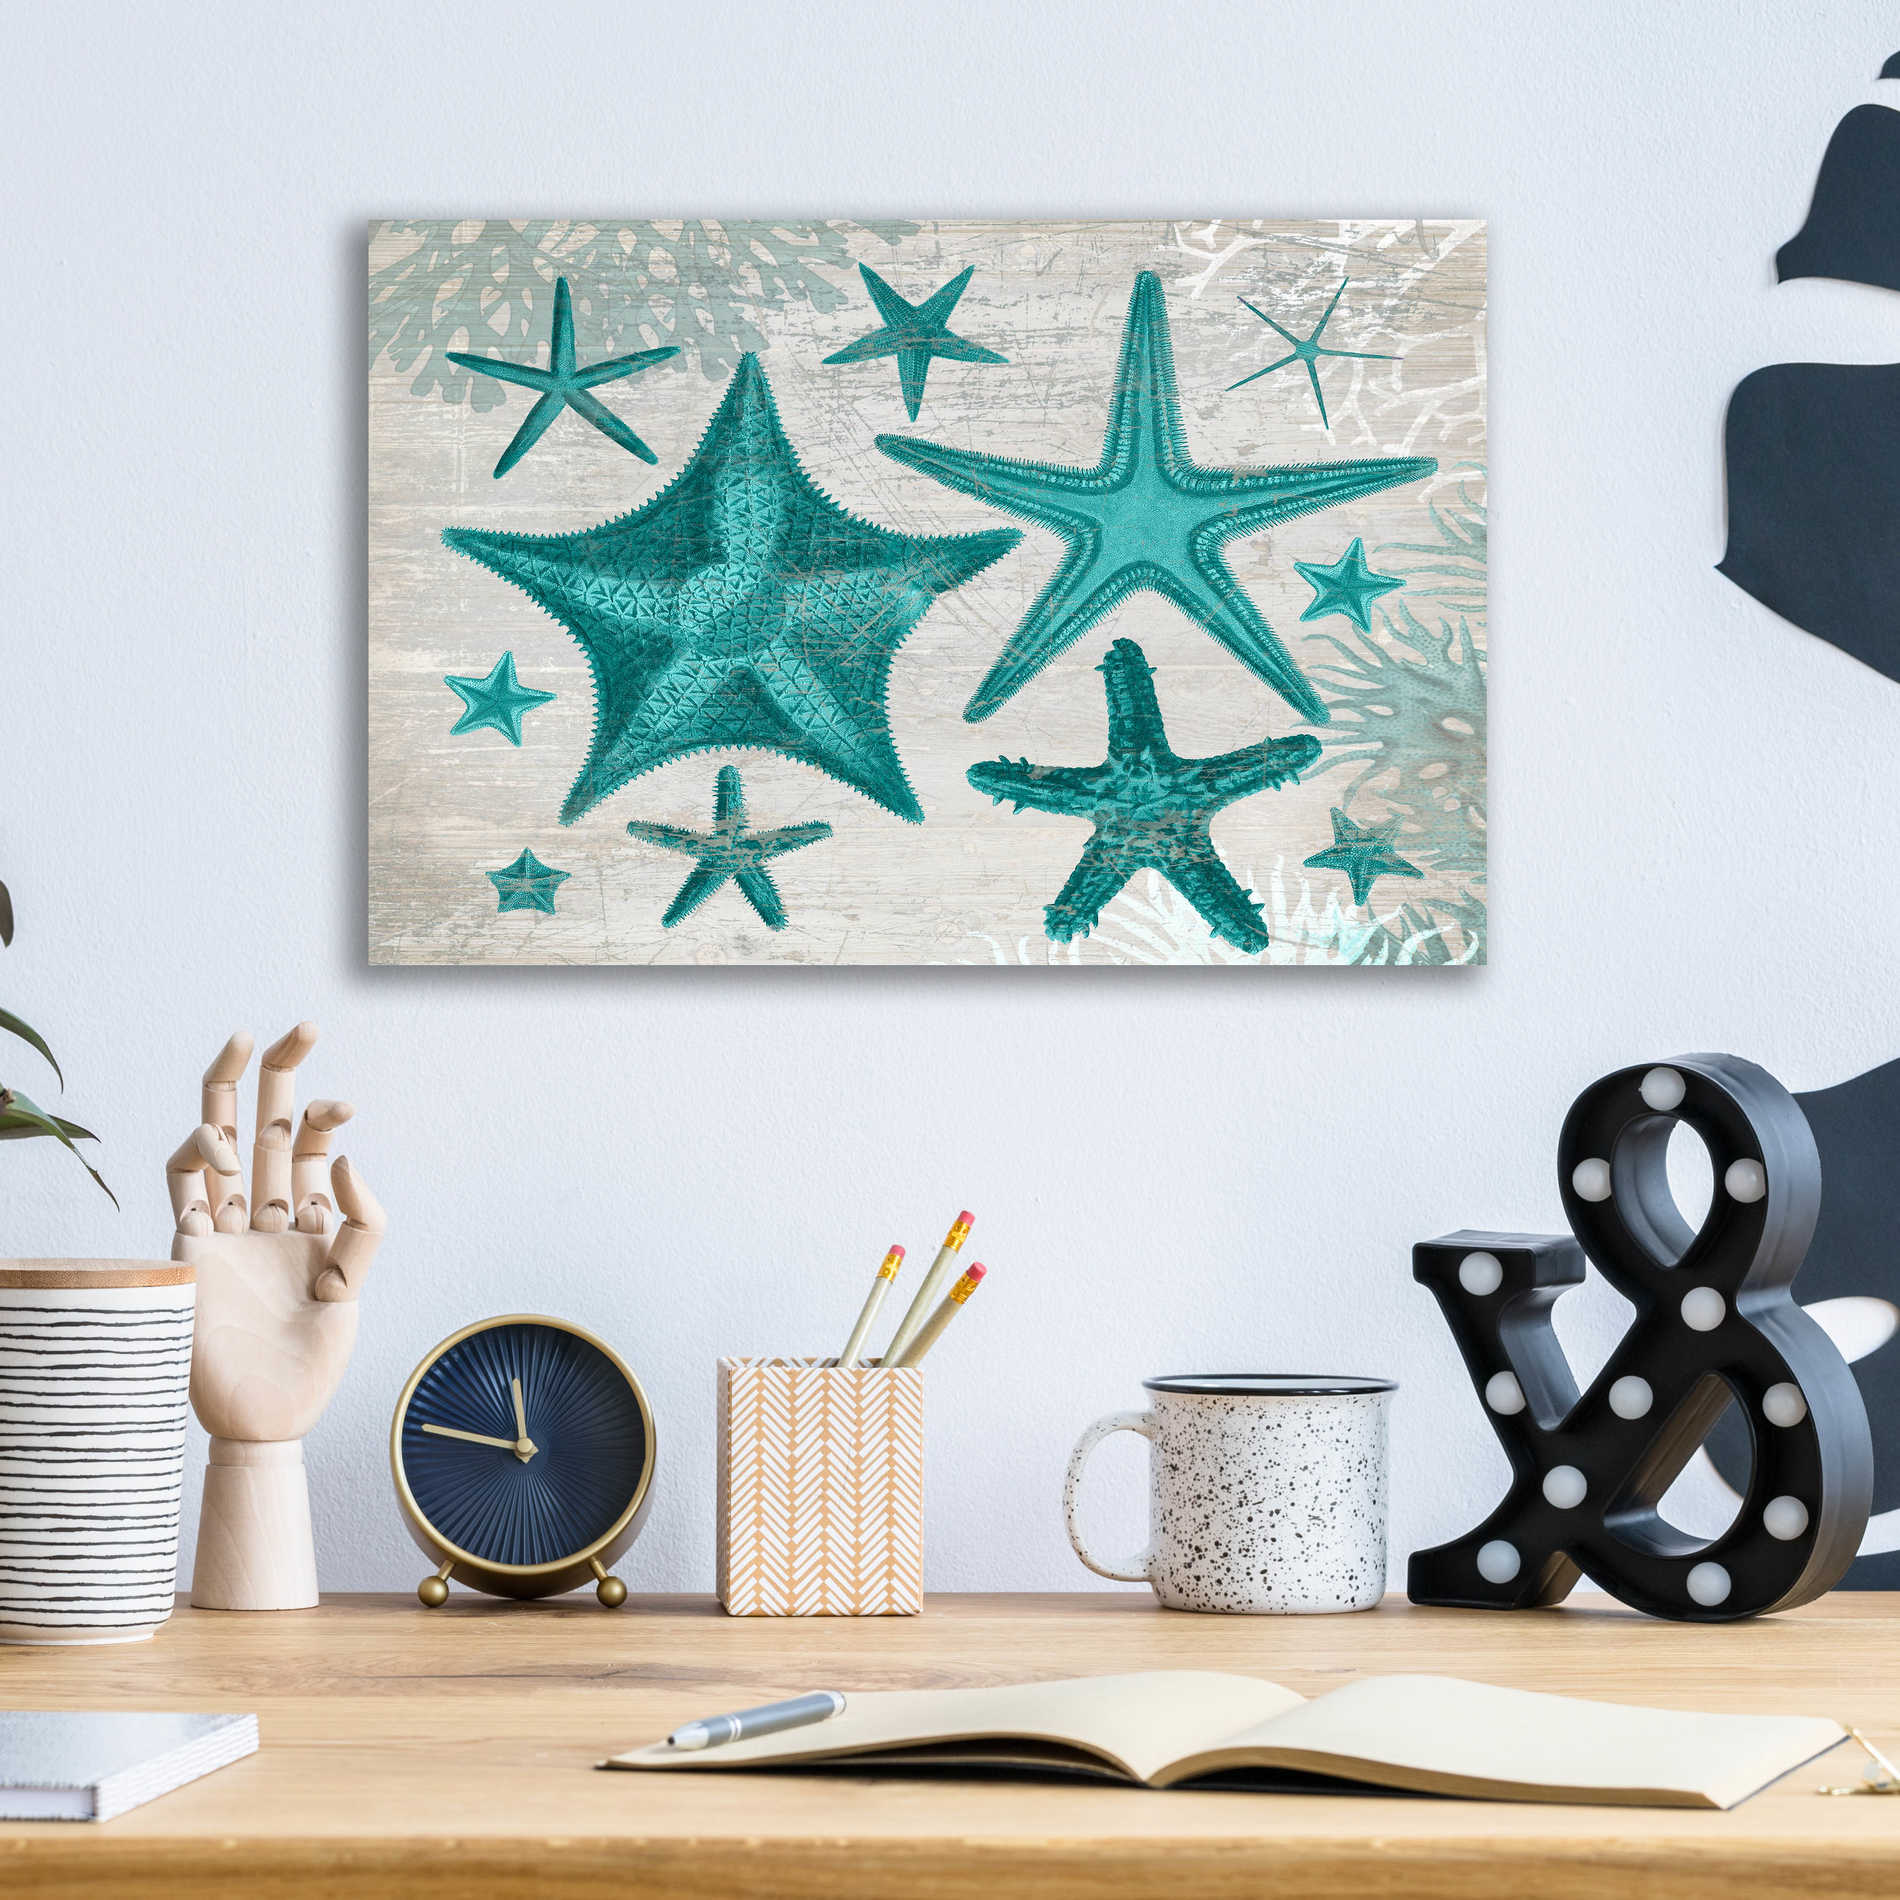 Epic Art 'Green Starfish Collection' by Fab Funky, Acrylic Glass Wall Art,16x12